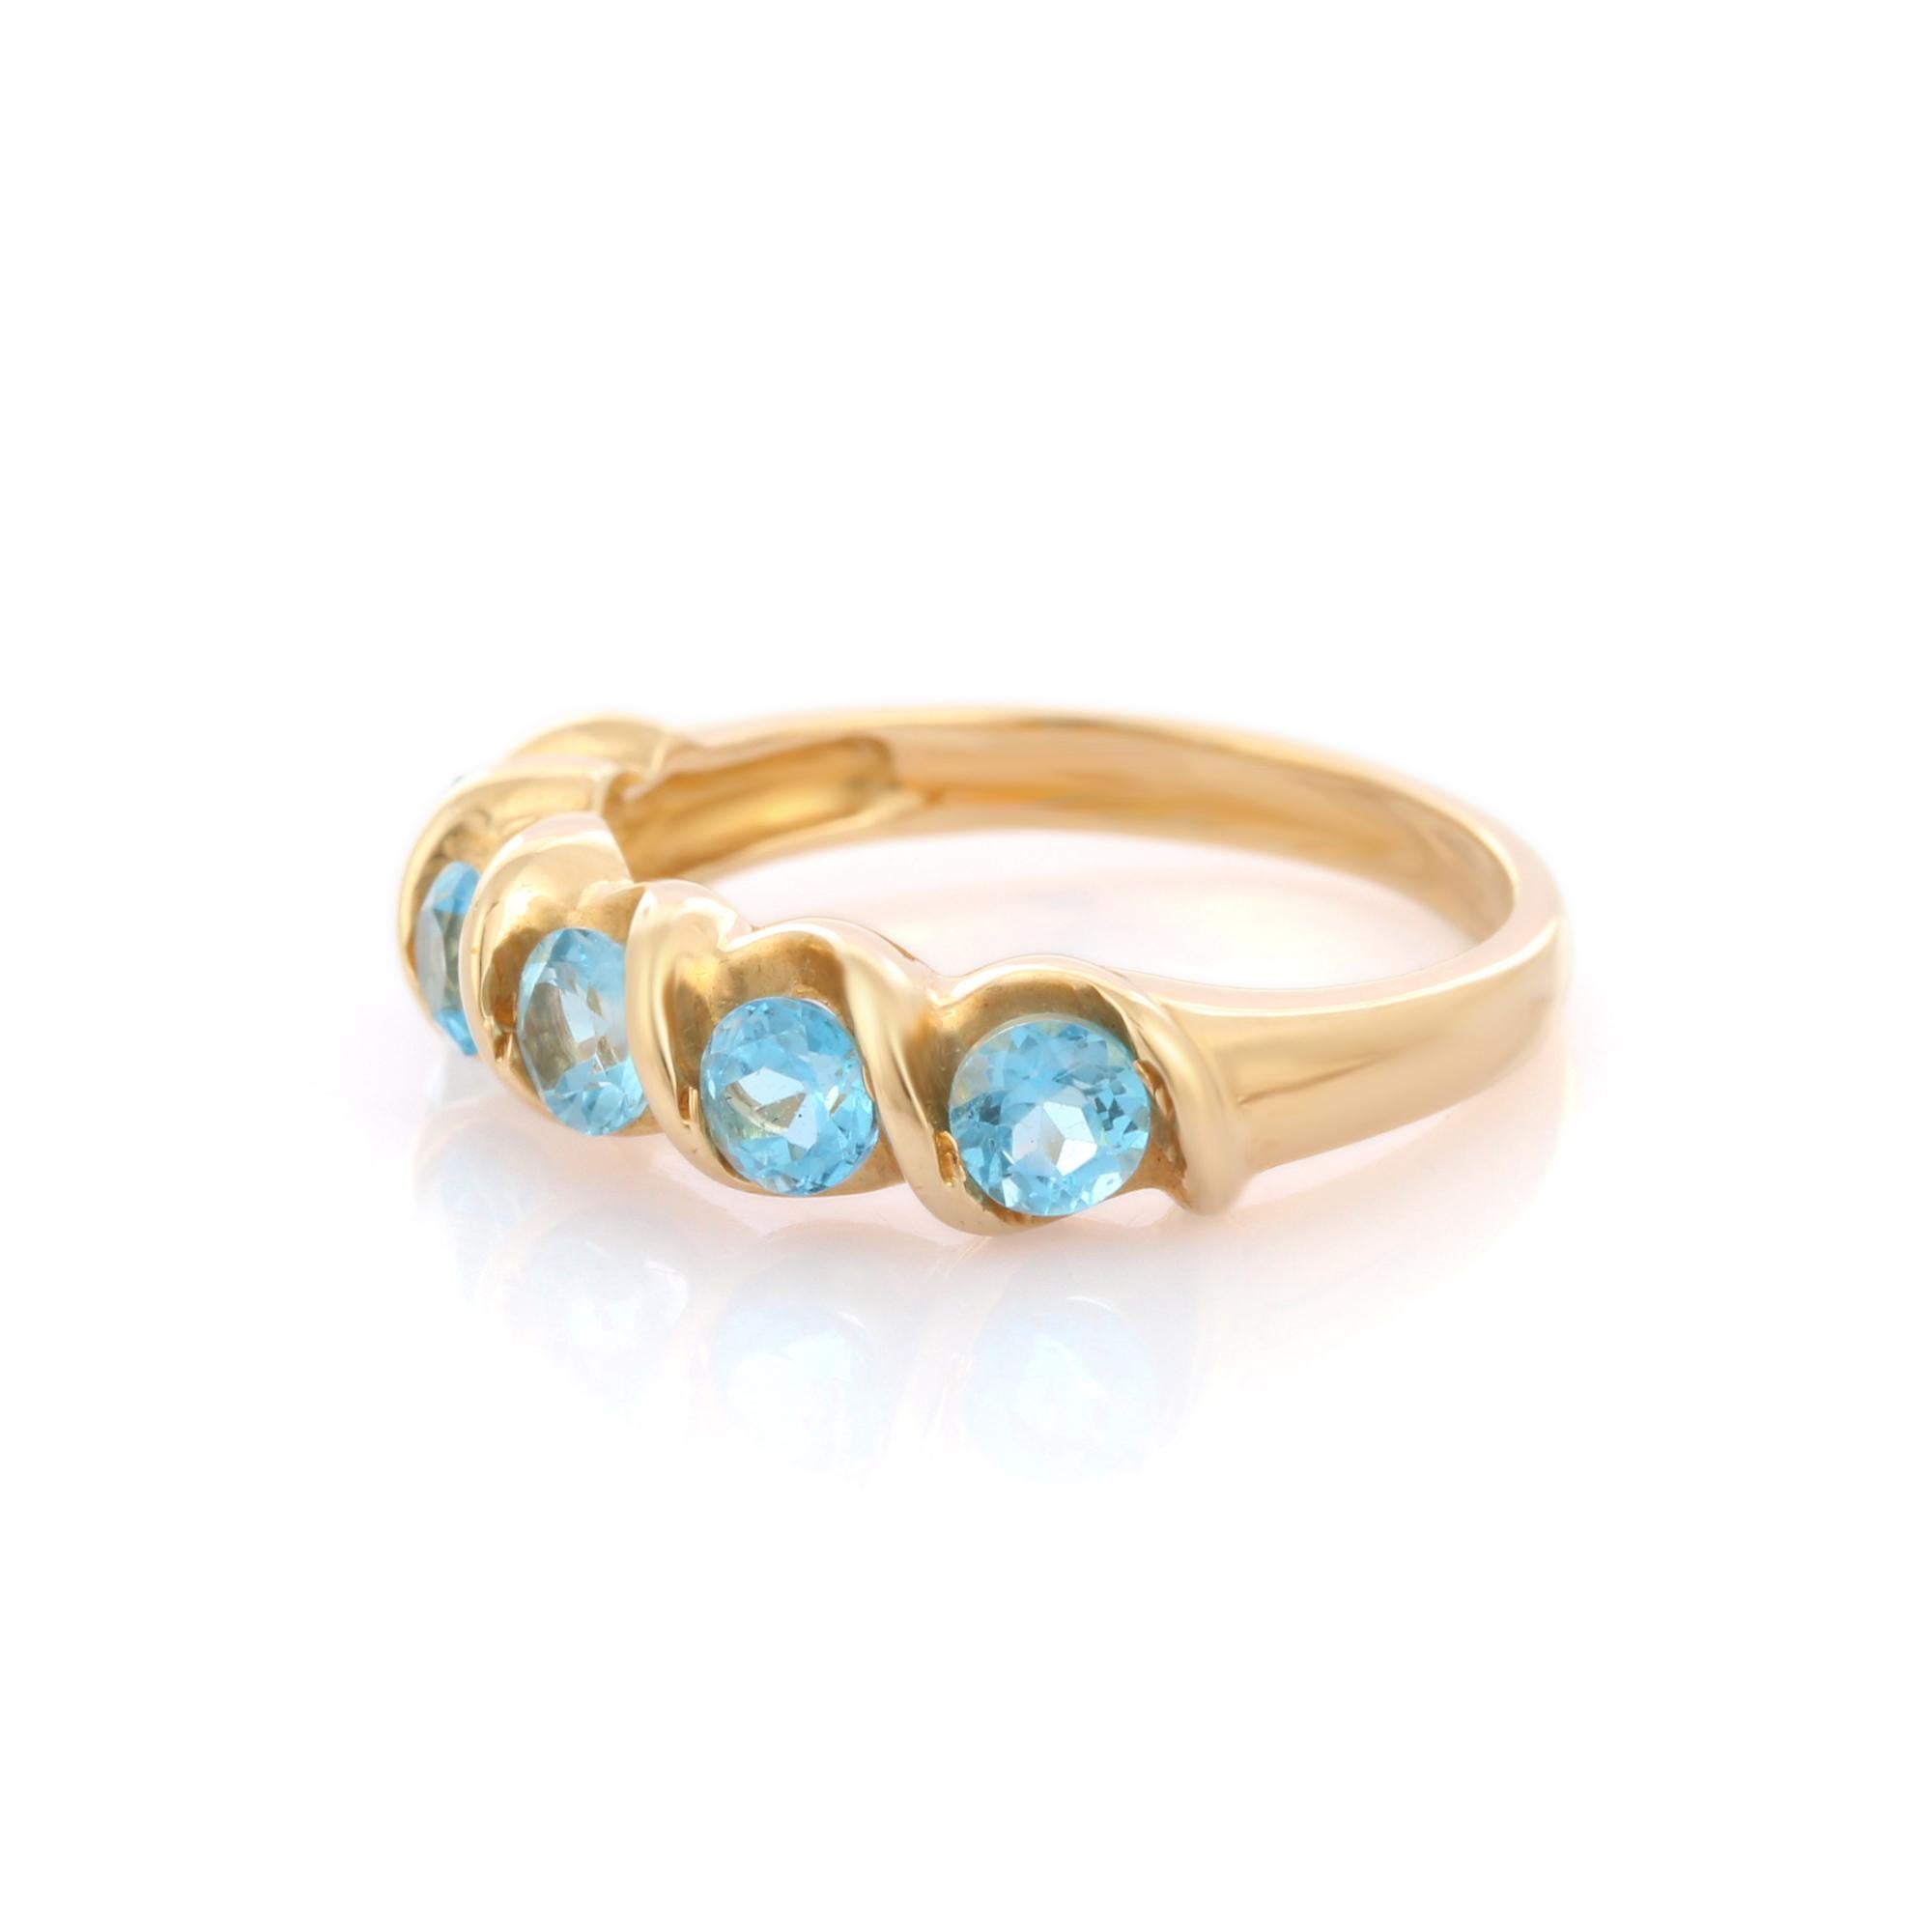 For Sale:  Blue Topaz Band Ring in 14k Solid Yellow Gold, December Birthstone Band 3